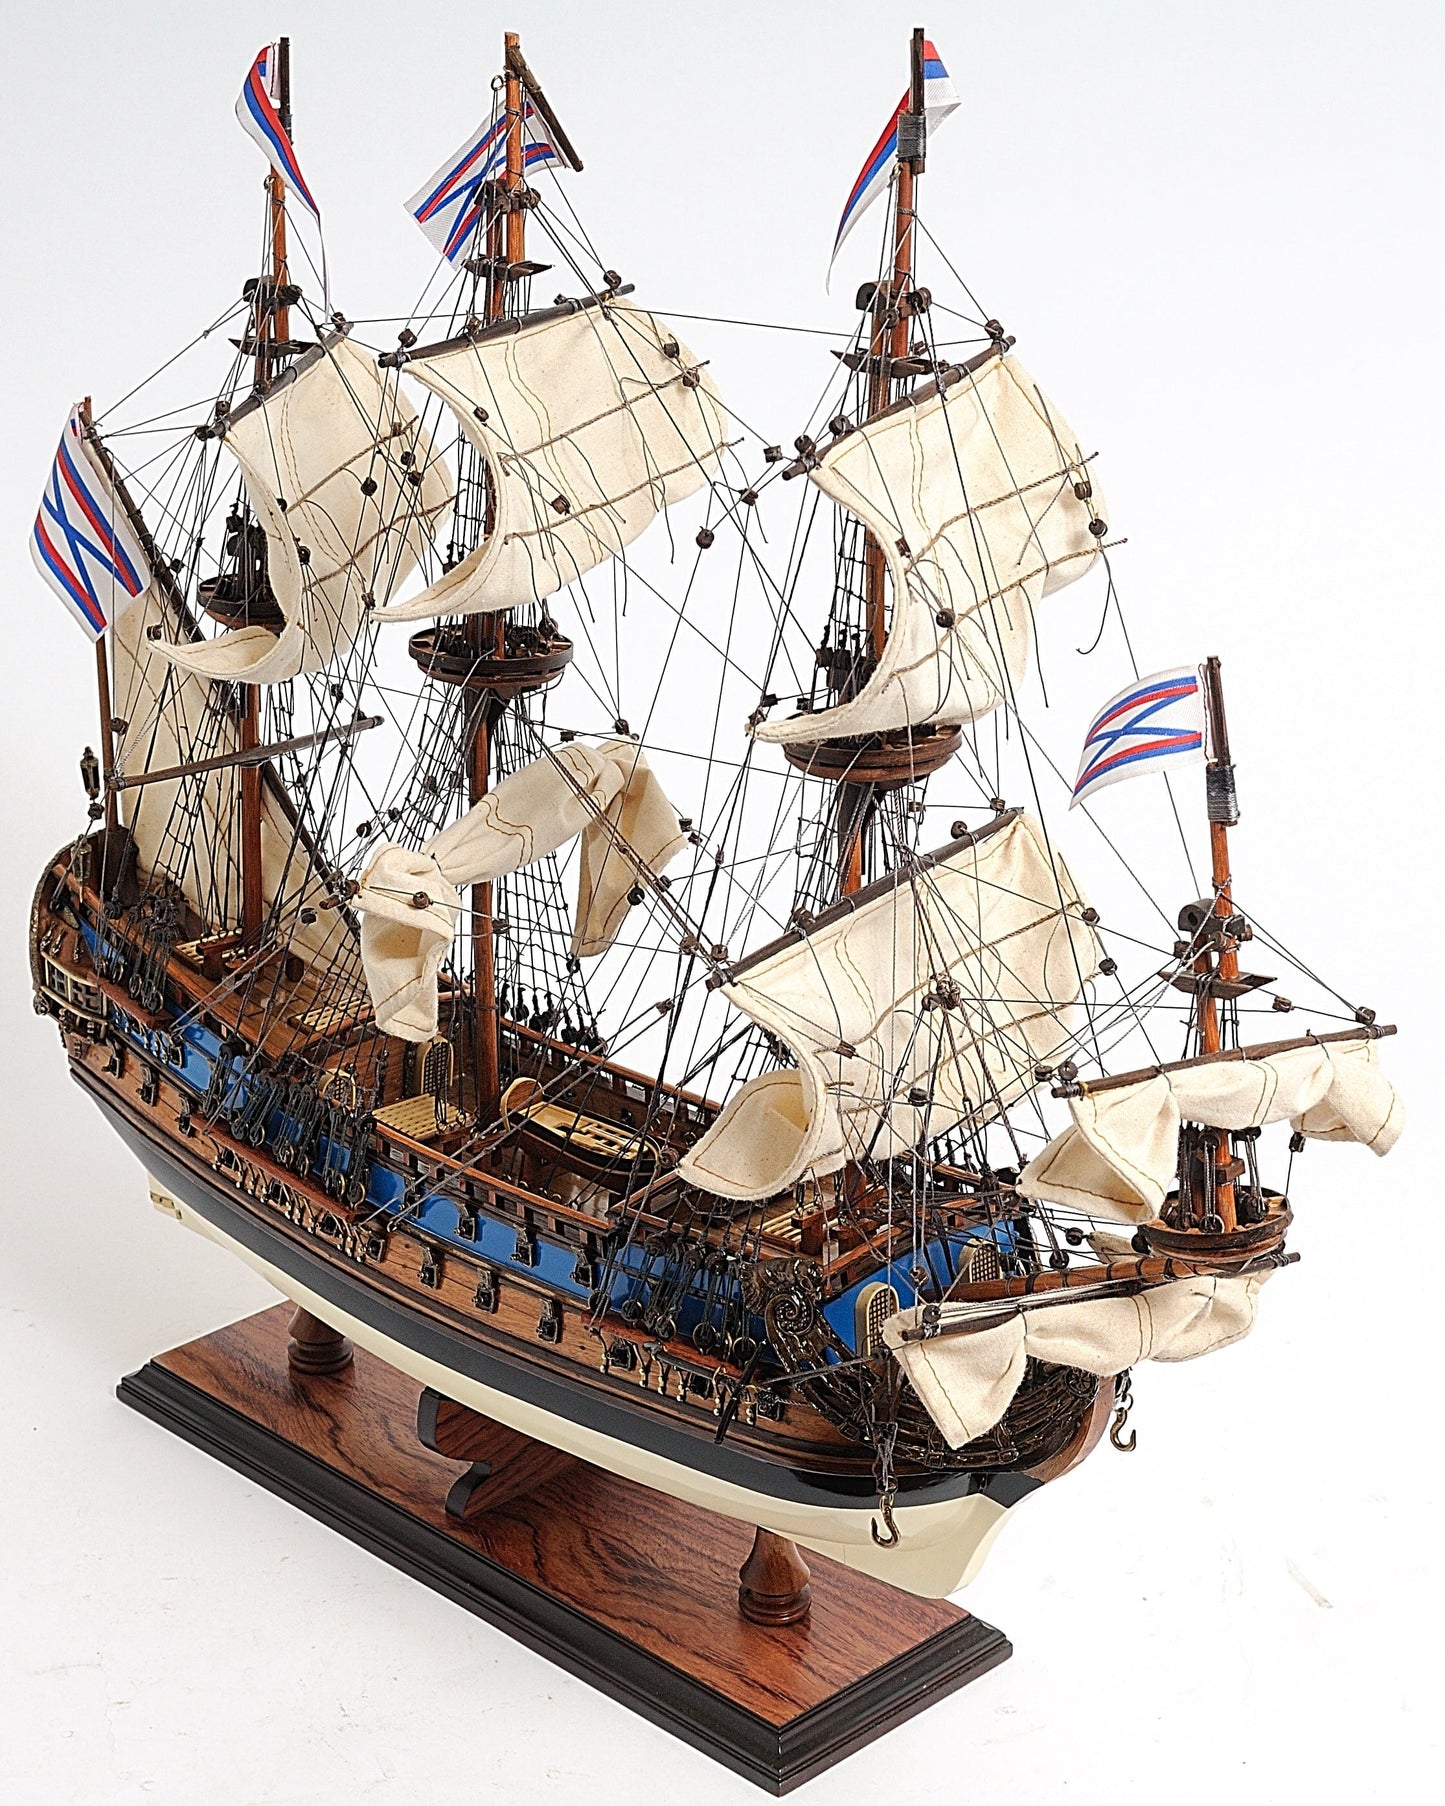 Aldo Hobbies & Creative Arts> Collectibles> Scale Model new / Wood / L: 22 W: 7.5 H: 21.5 Inches Peter the Great Flagship Tallship Providence of God Goto Predestination Excusive Edition Small Wood Model Sailboat Assembled